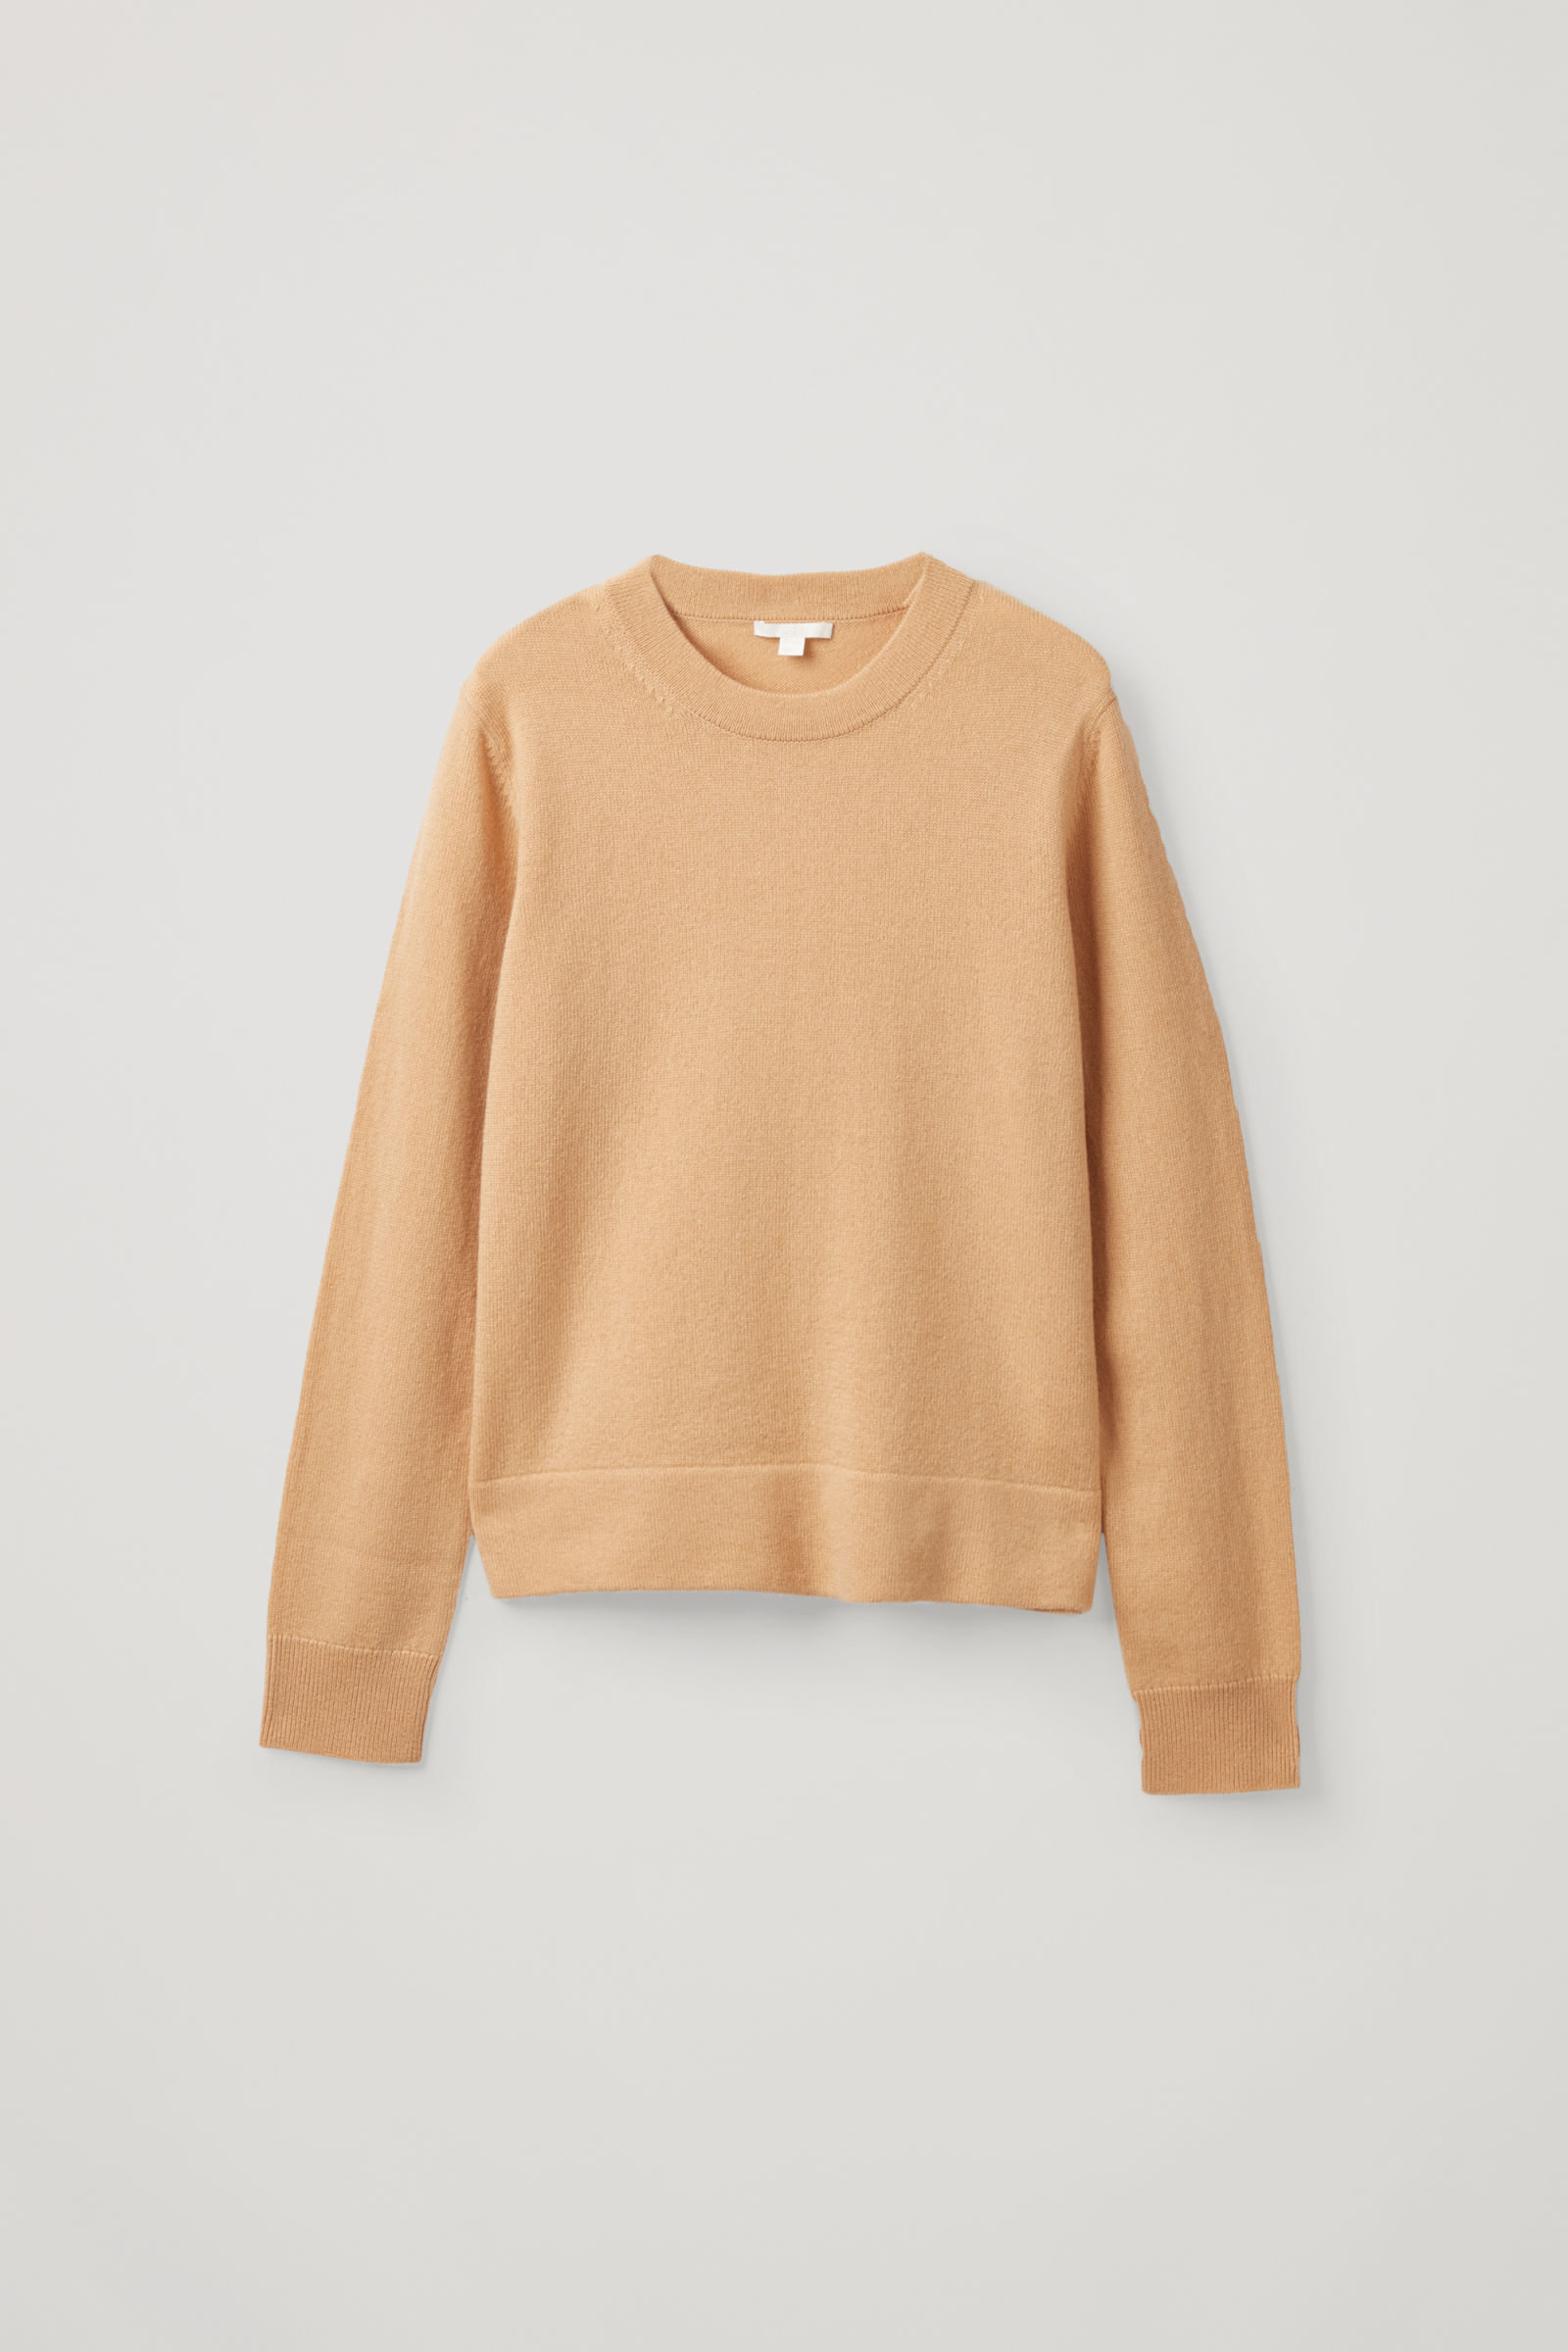 COS + Knitted Lambswool Top